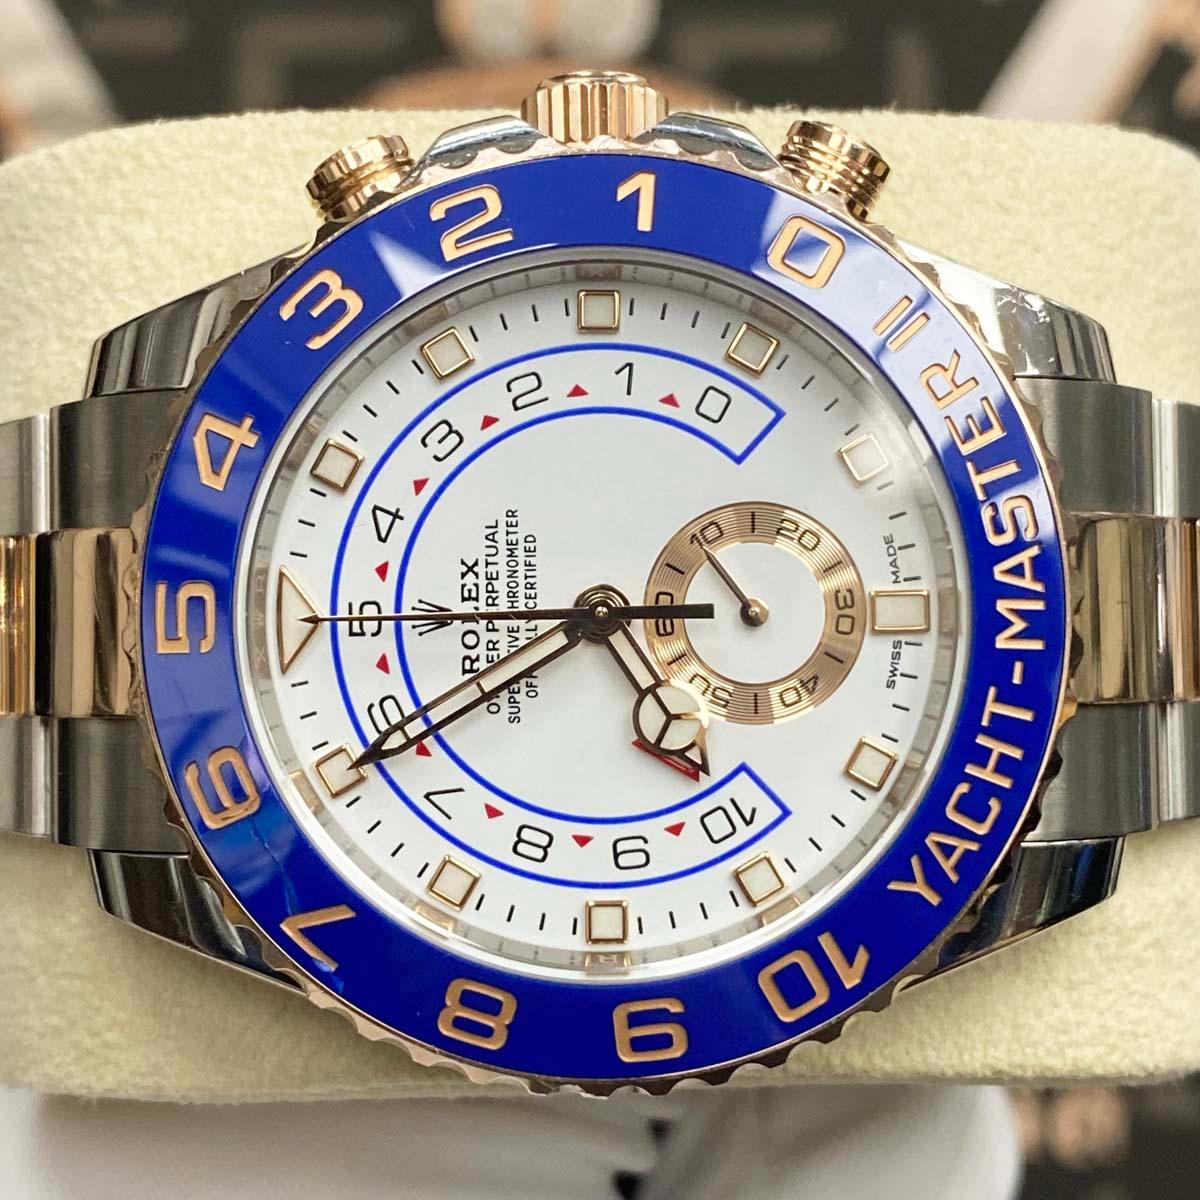 Rolex Yacht-Master II Newer Style Mercedes Hands 44mm 116681 White Dial Pre-Owned - Gotham Trading 